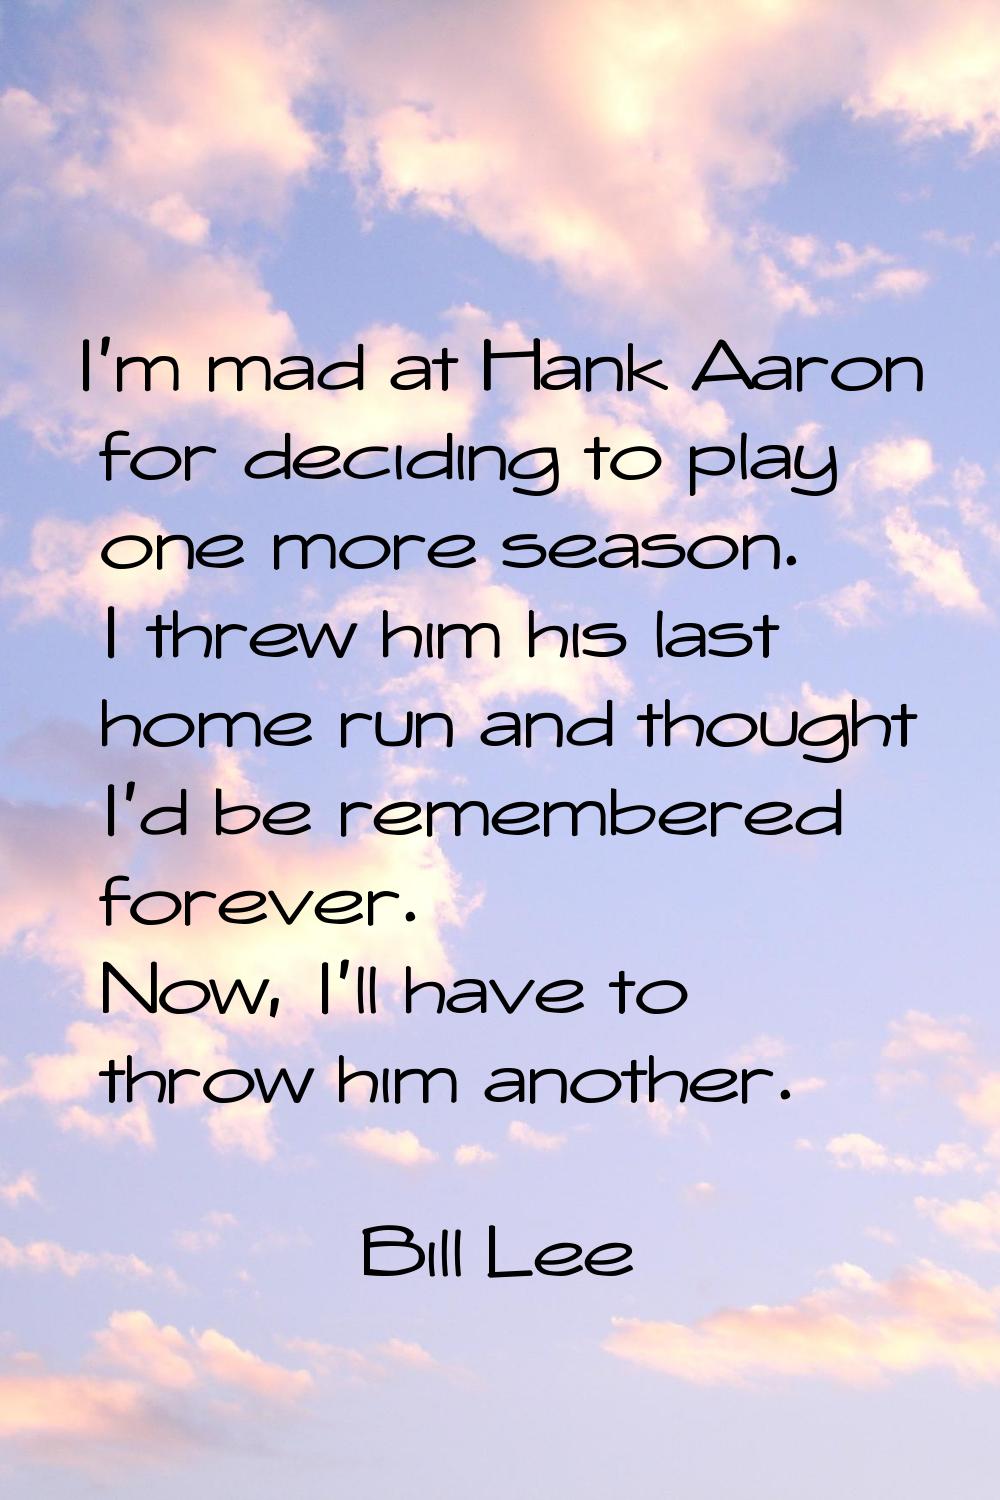 I'm mad at Hank Aaron for deciding to play one more season. I threw him his last home run and thoug